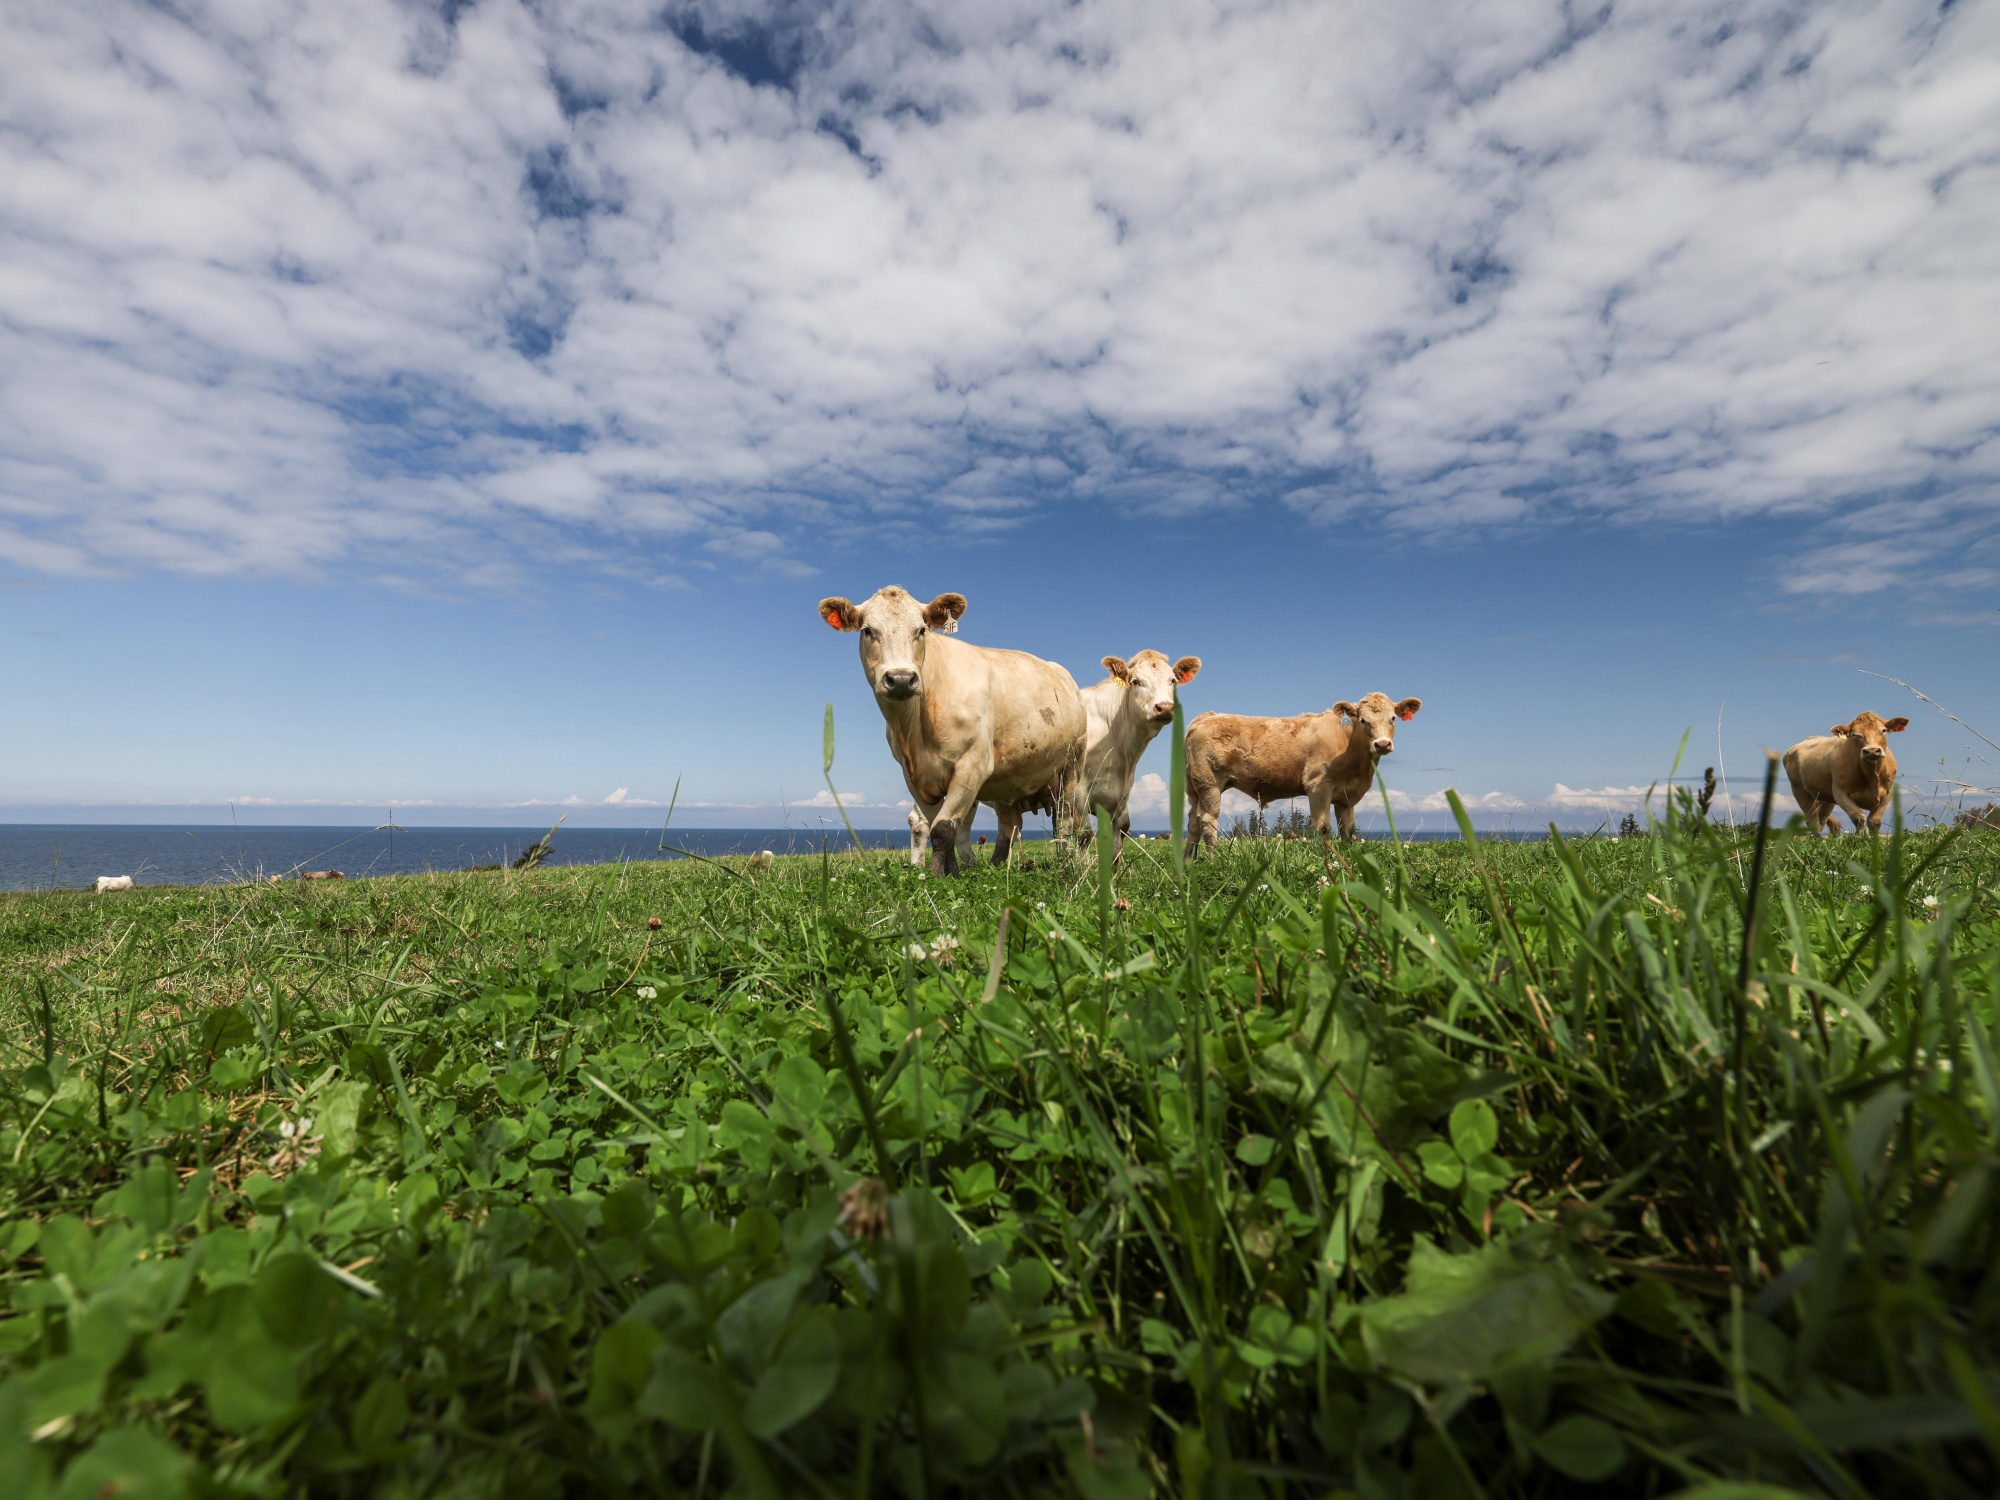 Four cows in a community pasture under a blue sky with white clouds